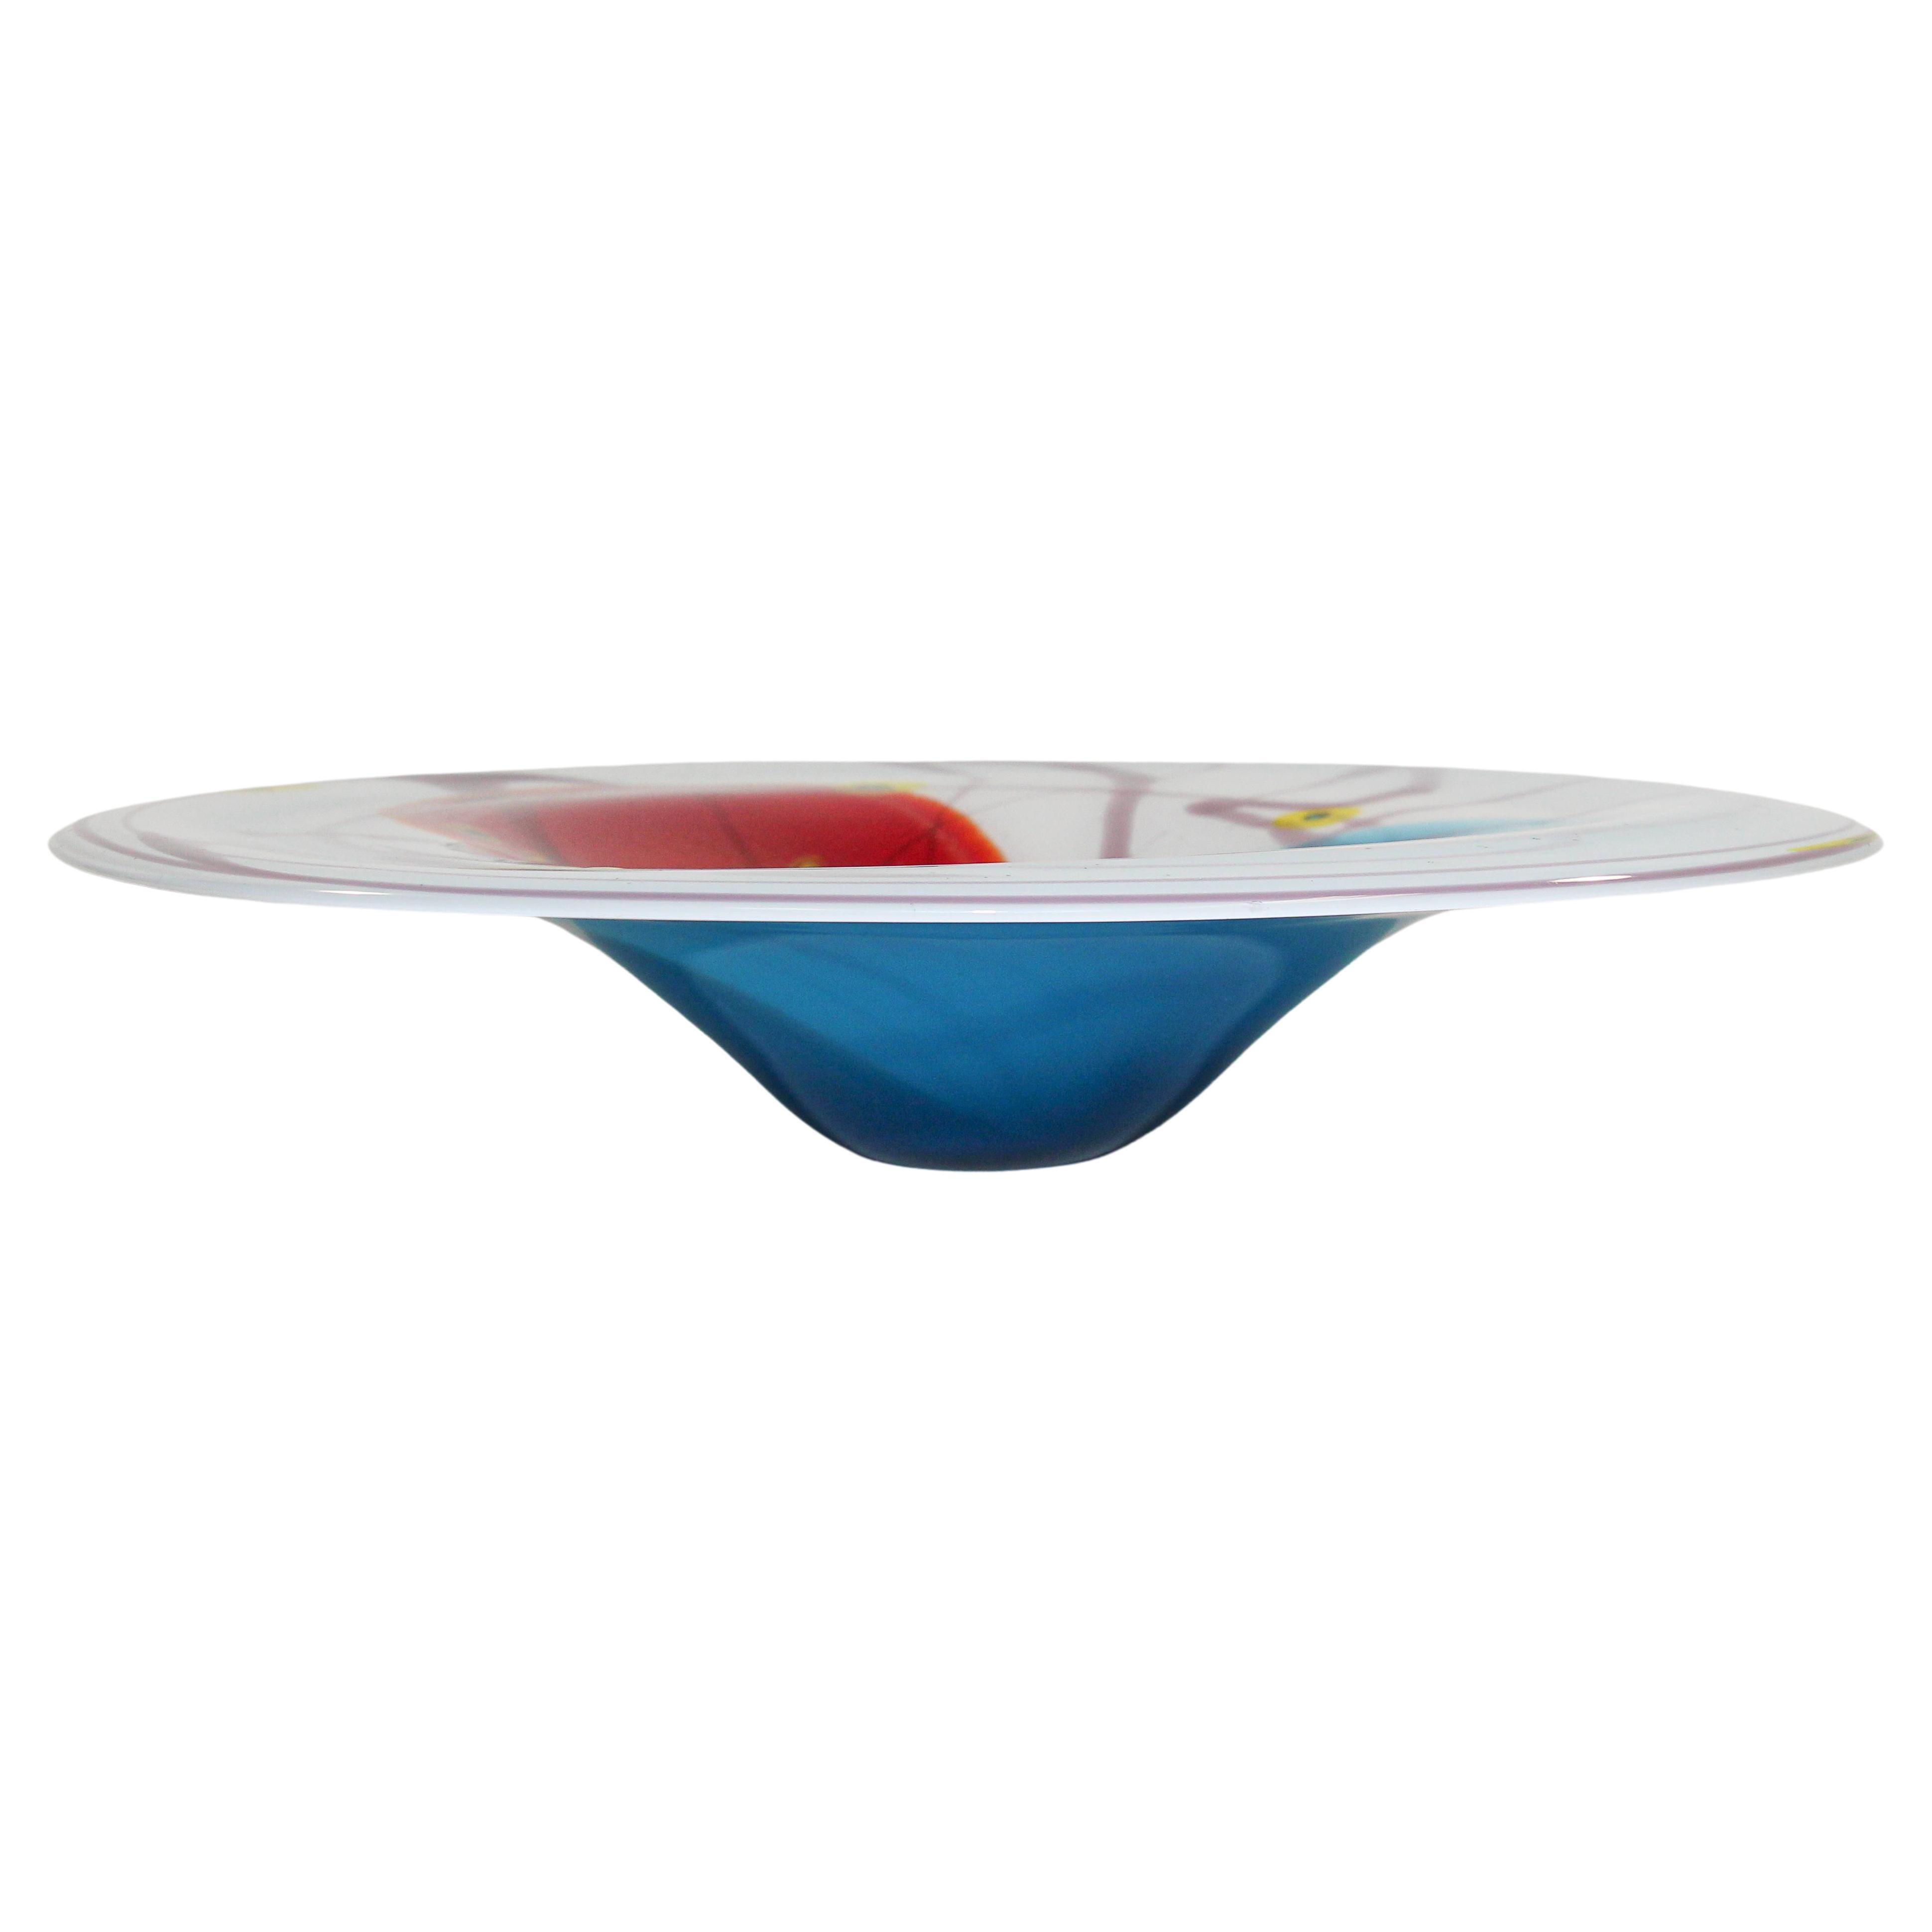 Beautiful mid-20th century Italian Murano Venetian hand blown art glass large bowl.
Fabulous large heavy glass bowl in bright colors with red white yellow and blue outside.
Beautiful decorative piece for any table or shelf, large decorative bowl